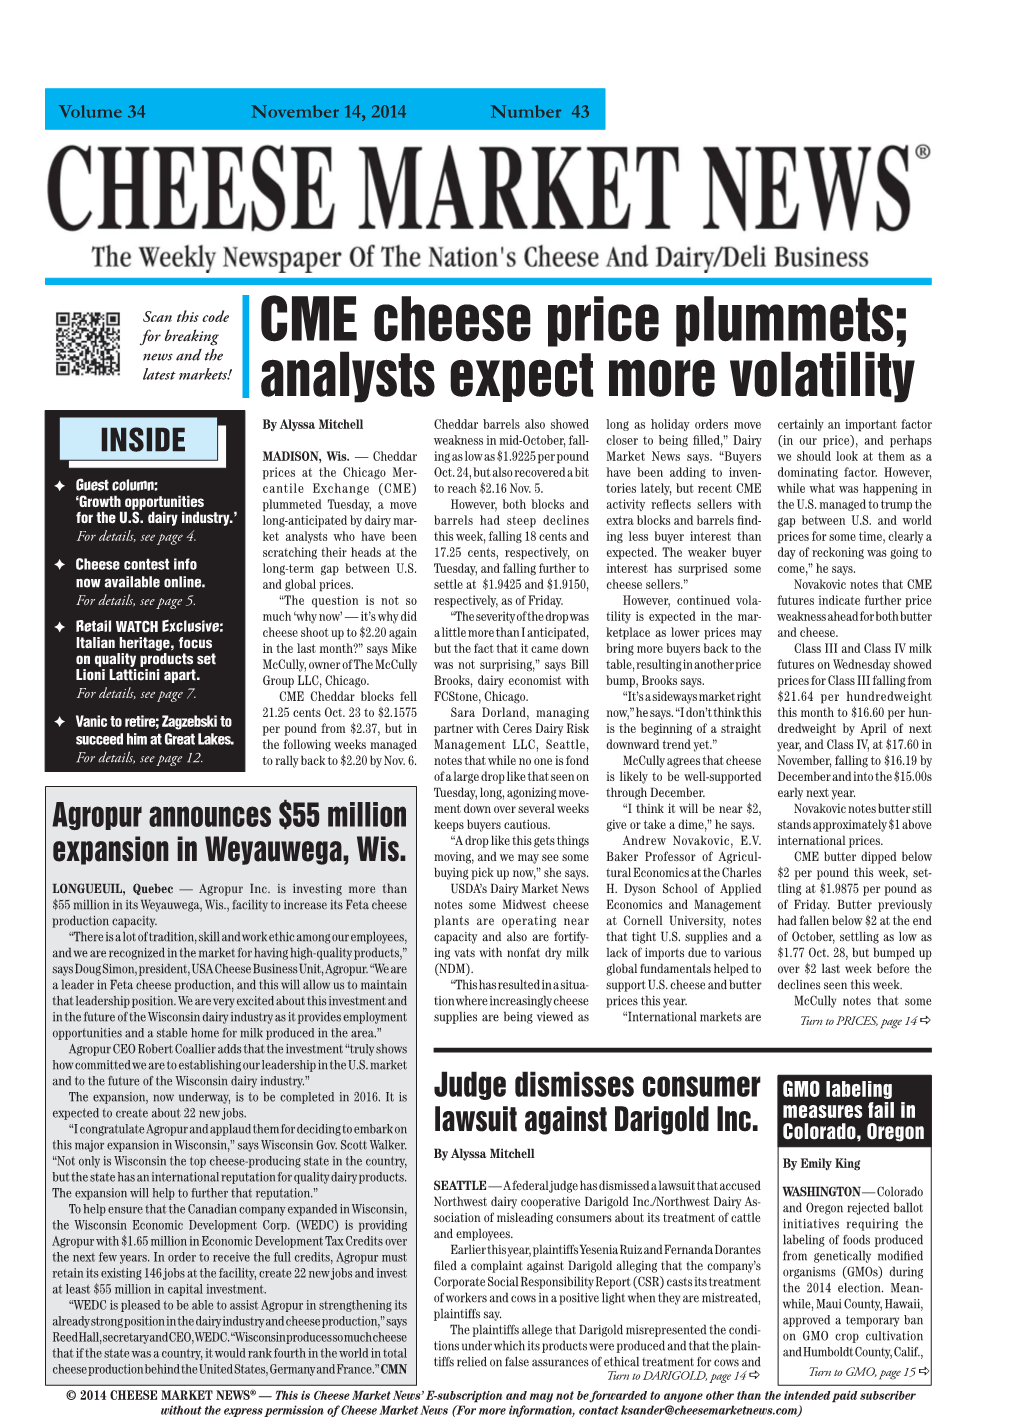 CME Cheese Price Plummets; Analysts Expect More Volatility